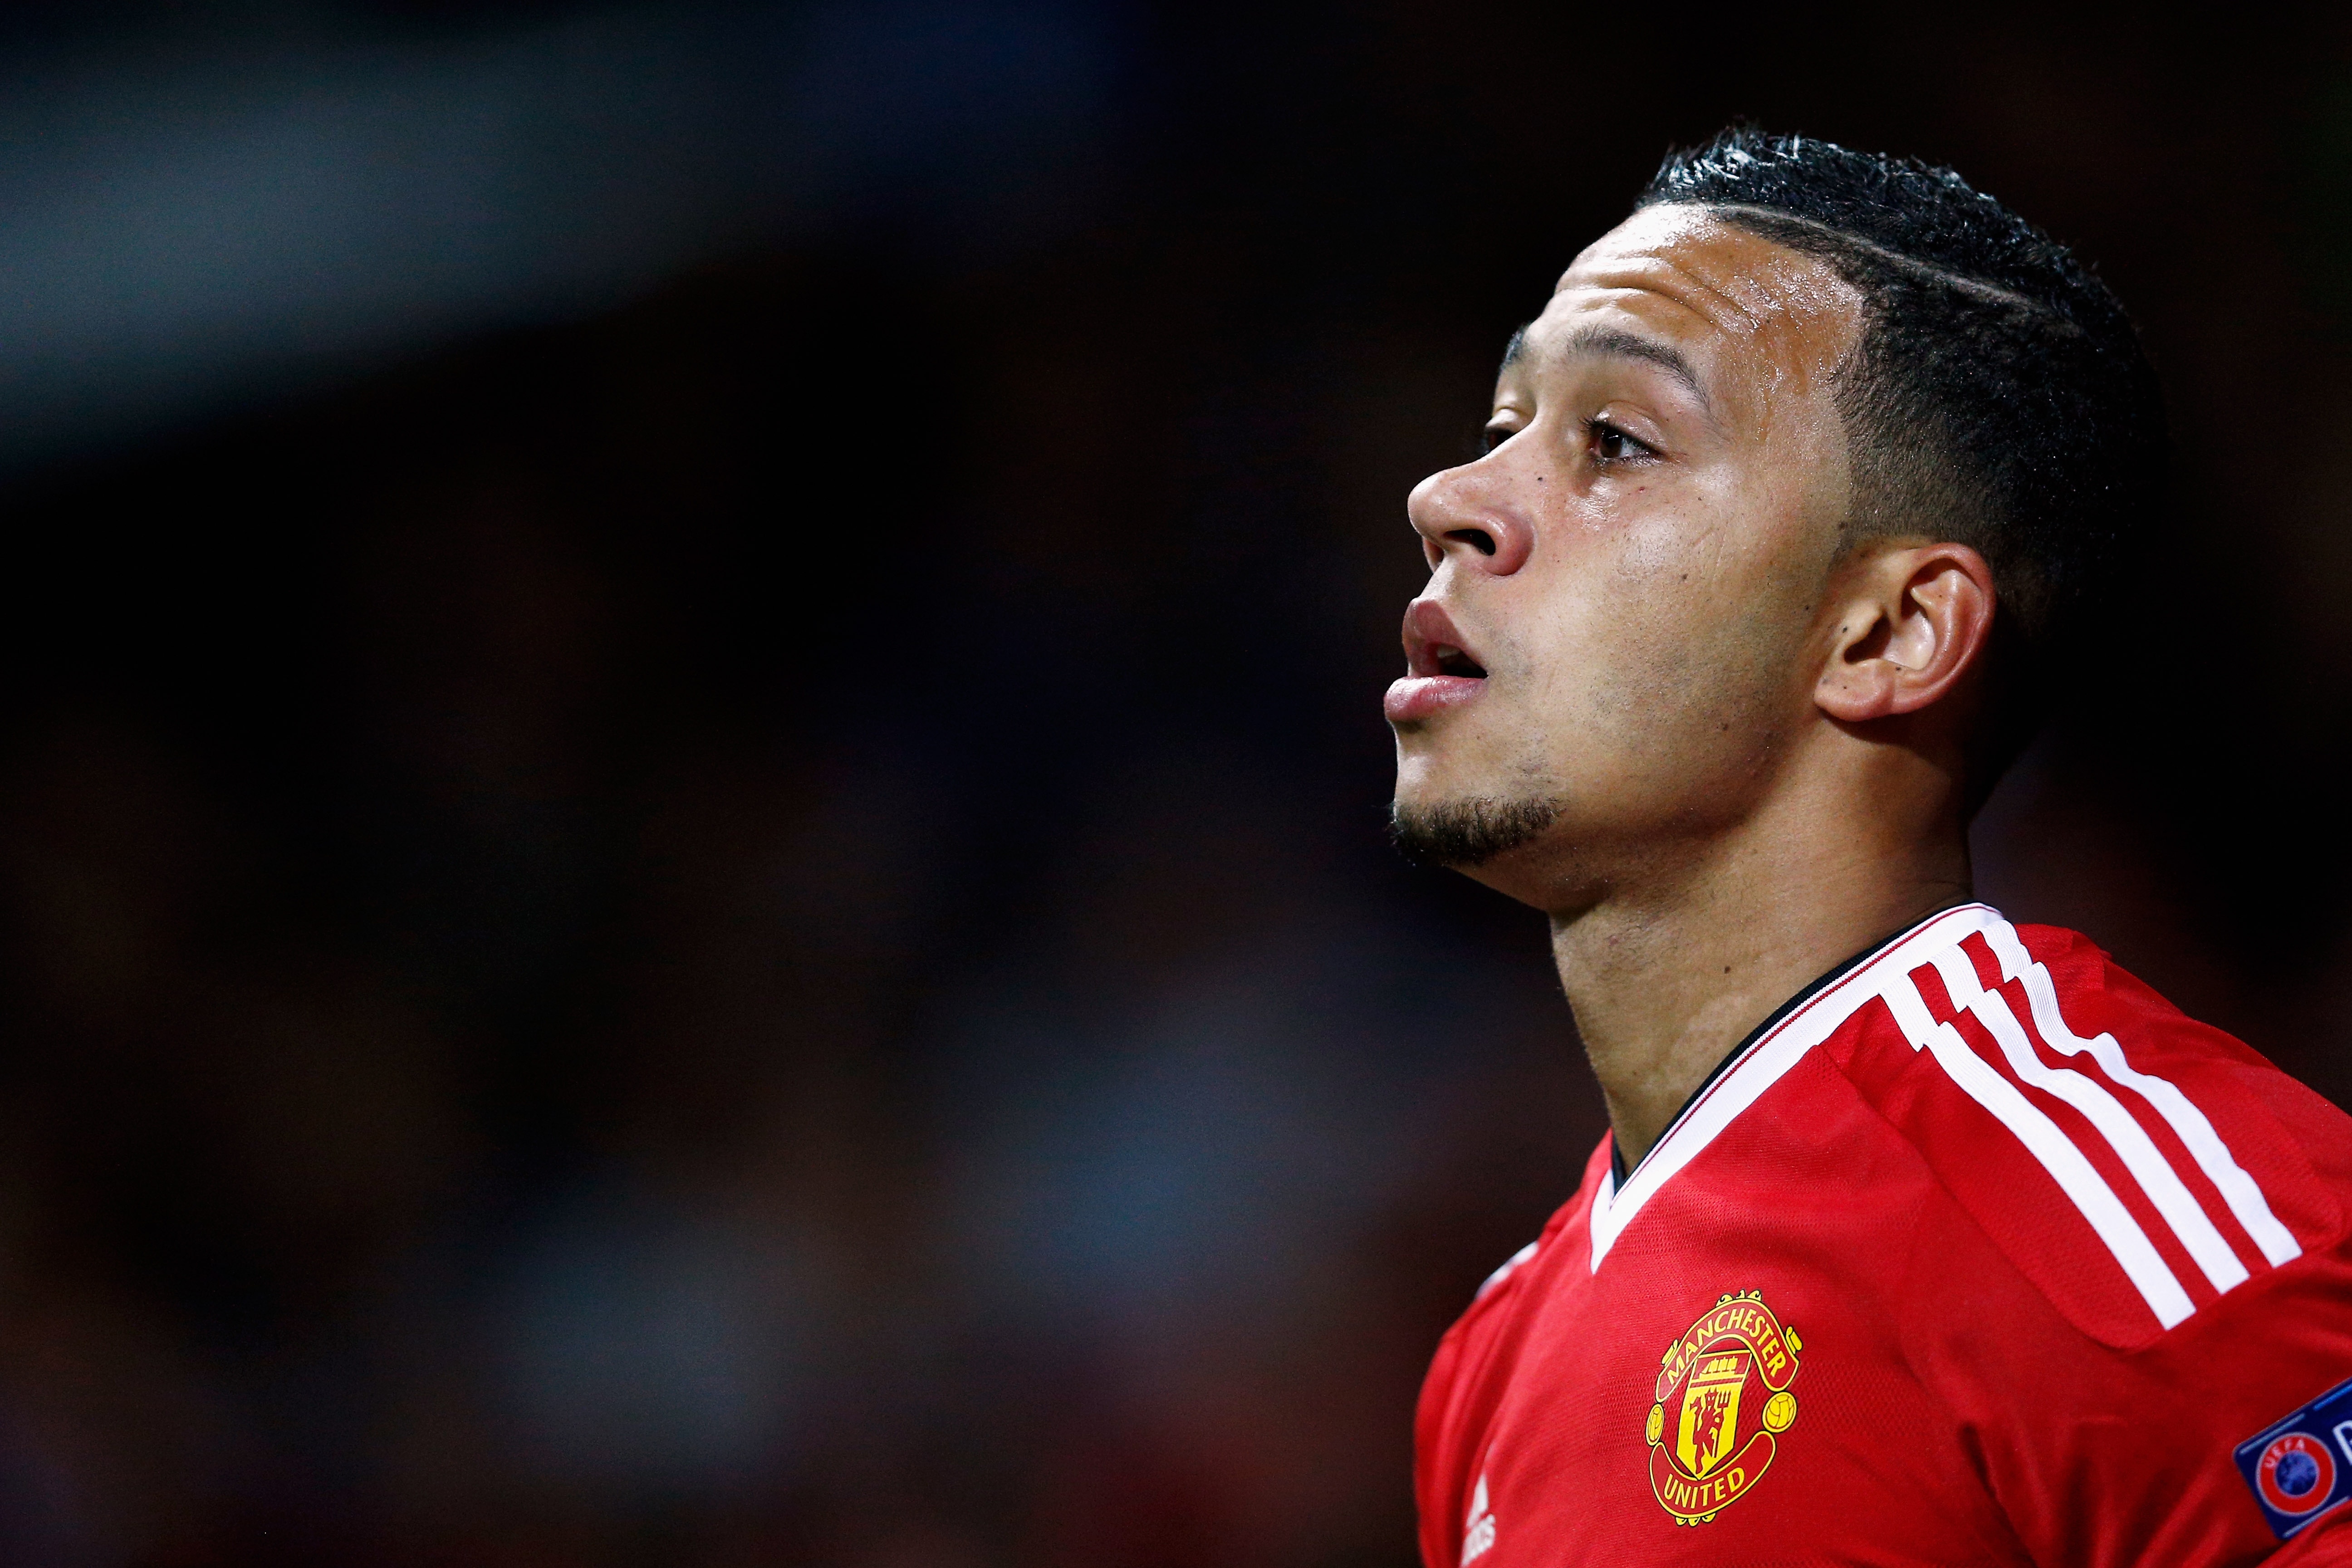 MANCHESTER, ENGLAND - SEPTEMBER 30:  Memphis Depay of Manchester United looks on during the UEFA Champions League Group B match between Manchester United FC and VfL Wolfsburg at Old Trafford on September 30, 2015 in Manchester, United Kingdom.  (Photo by Dean Mouhtaropoulos/Getty Images)